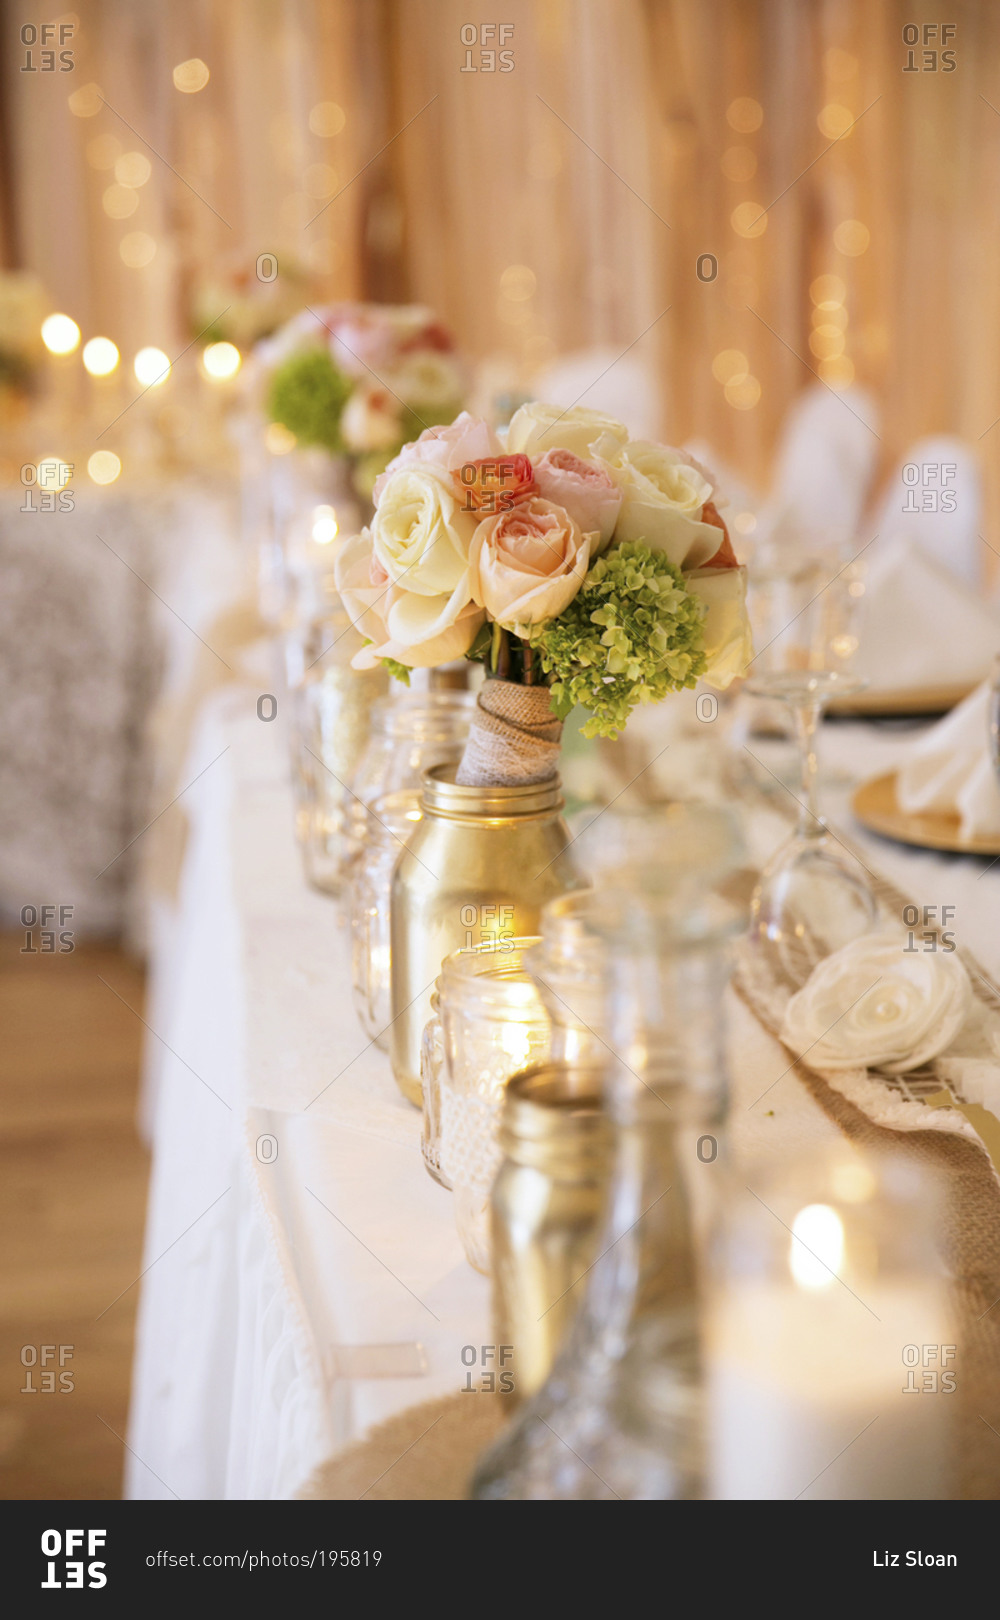 Mason jars, candles, and flowers decorating tables set for a wedding party